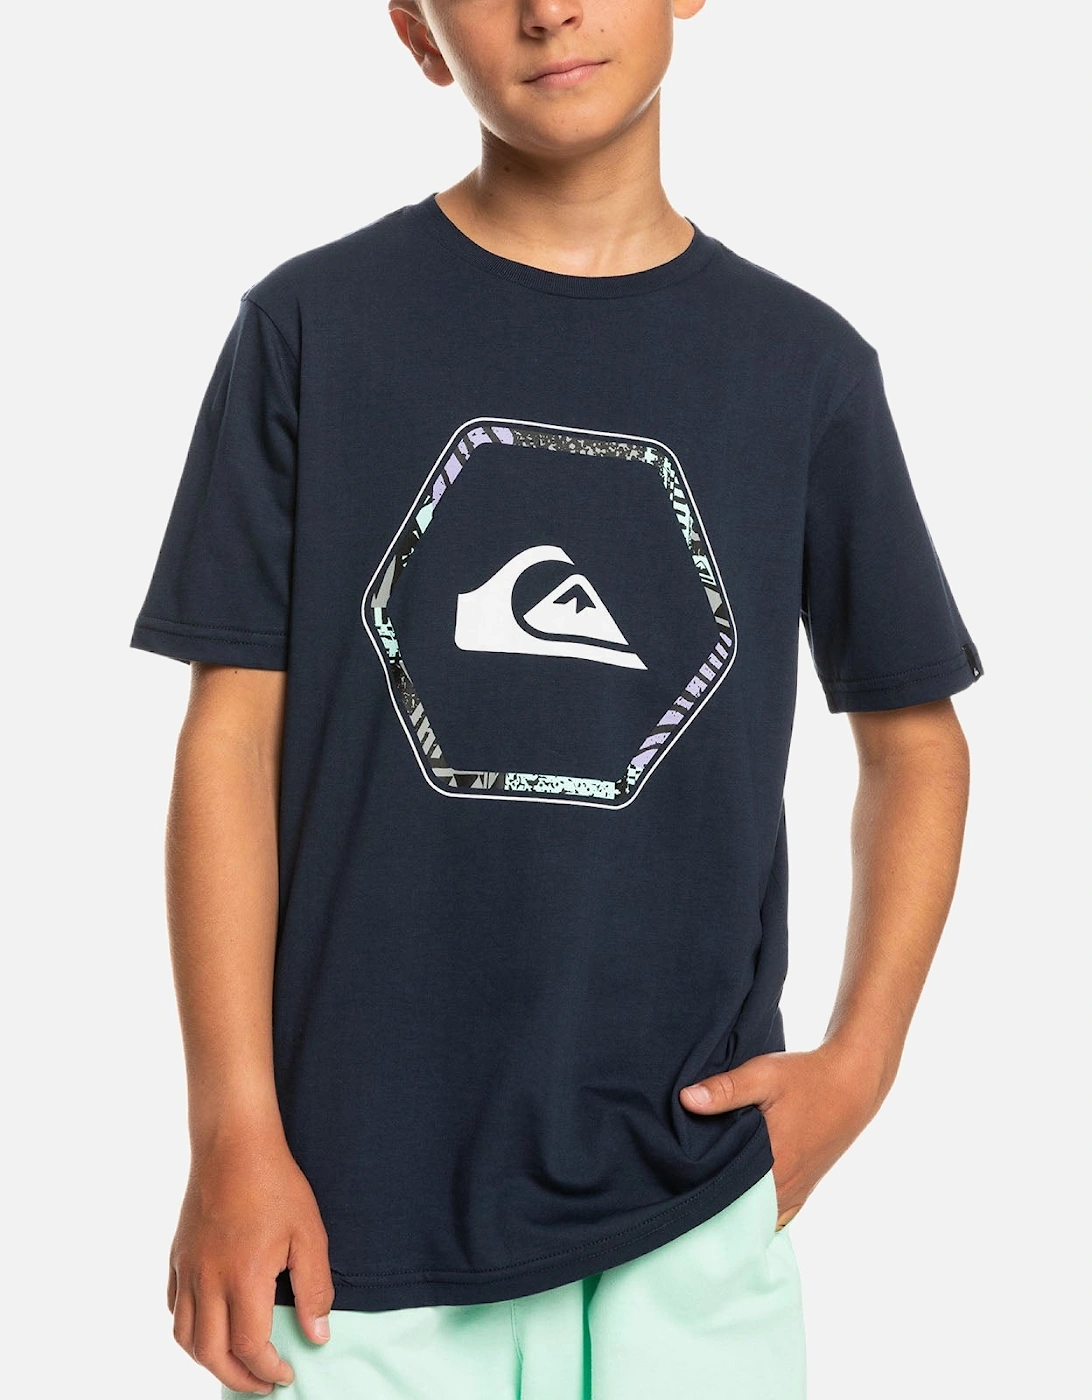 Kids In Shapes Crew Neck Cotton T-Shirt